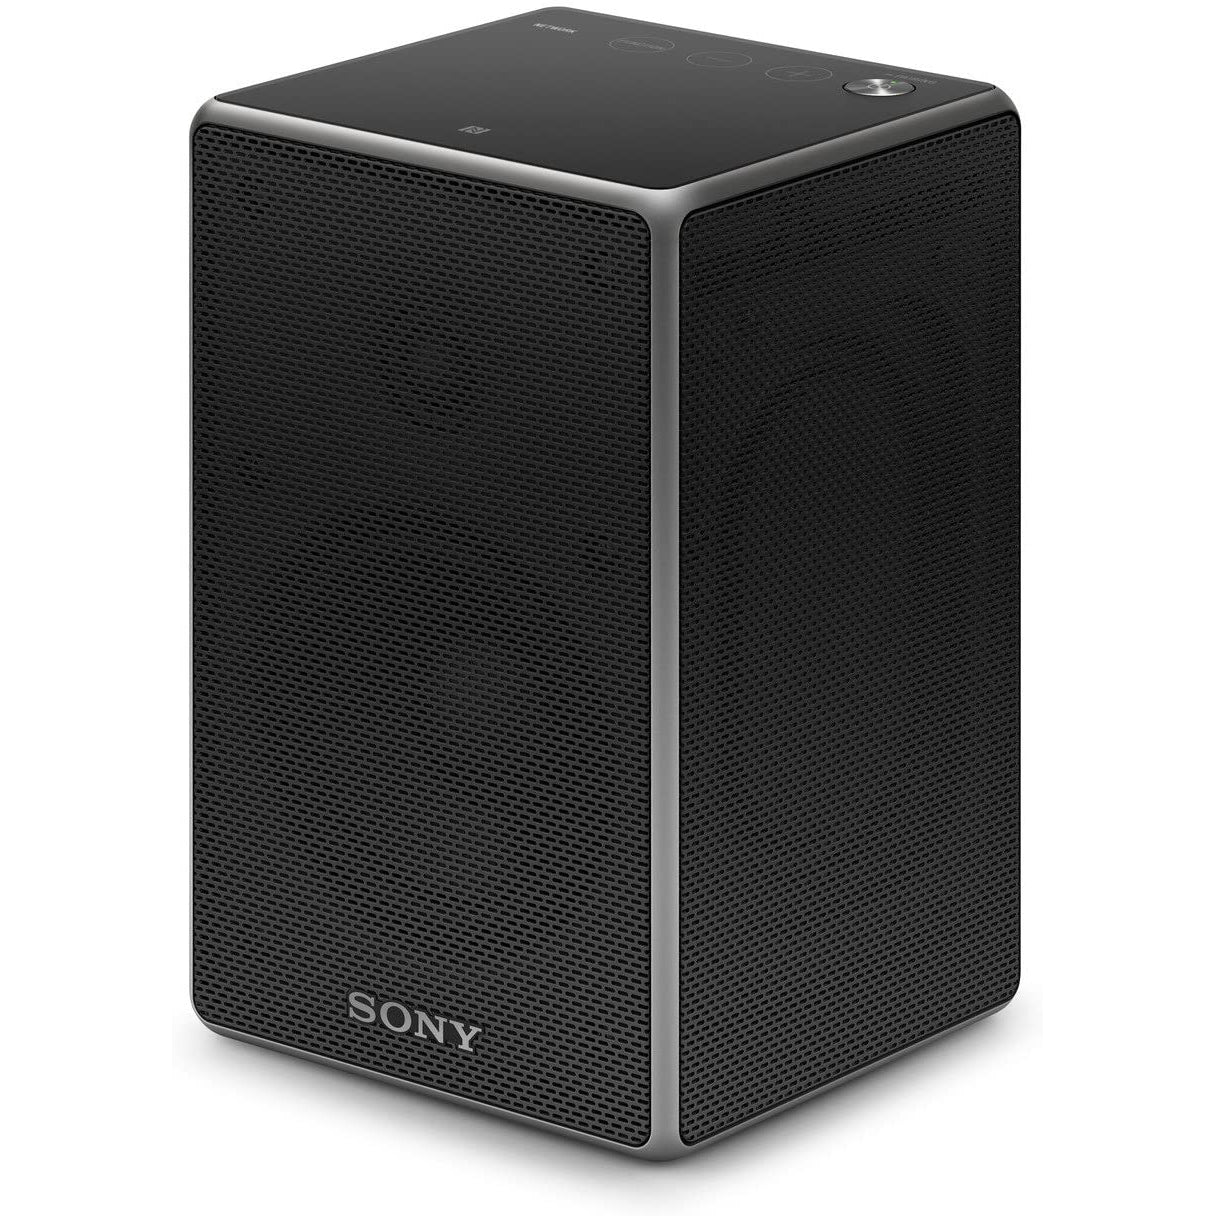 SONY SRSZR5B.CED Multi-Room Speaker with Wireless Stereo and Surround Capability - Black